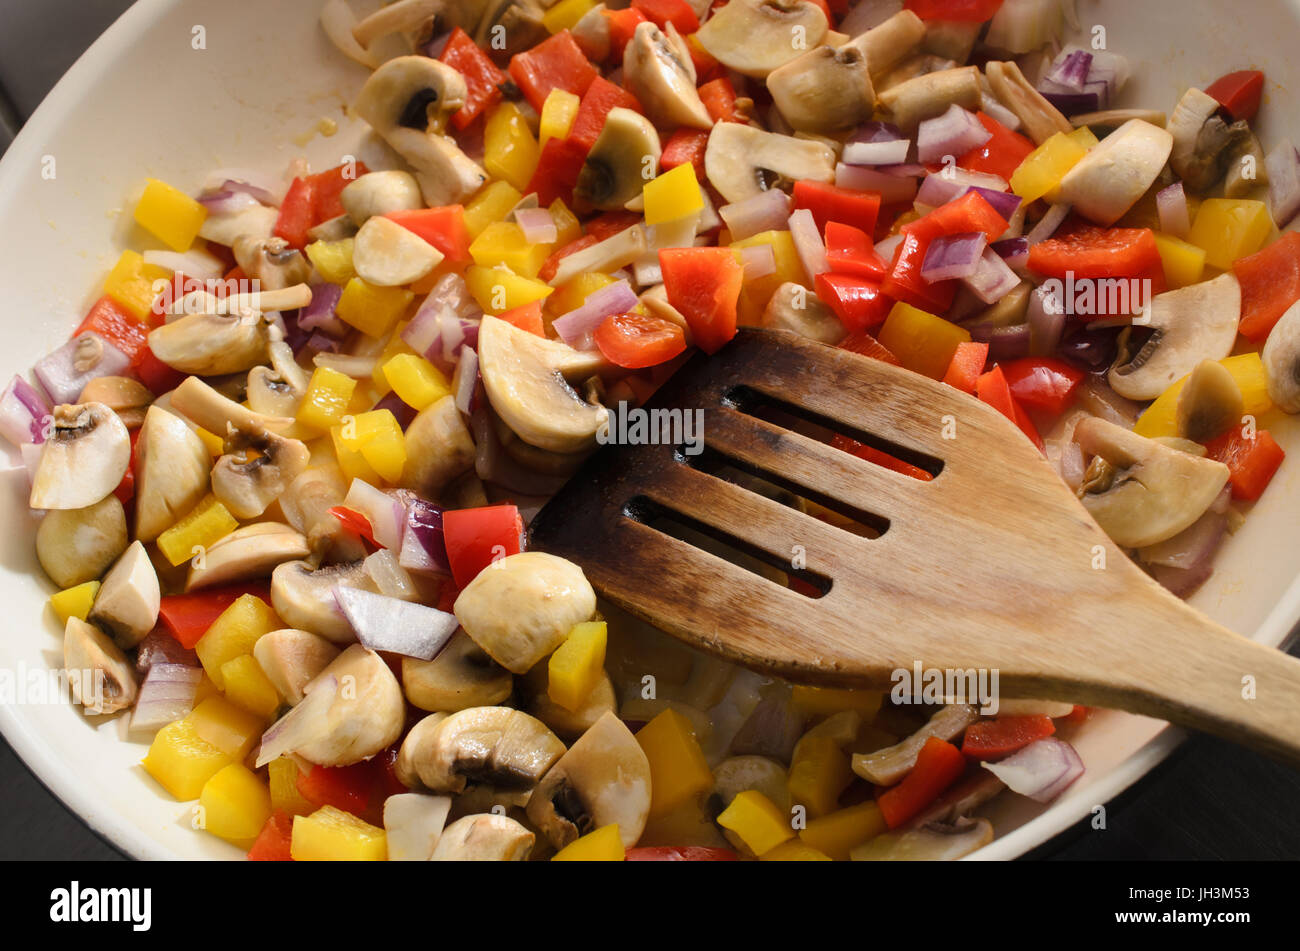 Overhead shot of mushrooms, red onions and red and yellow bell peppers frying in a ceramic pan with old wooden spatula. Stock Photo